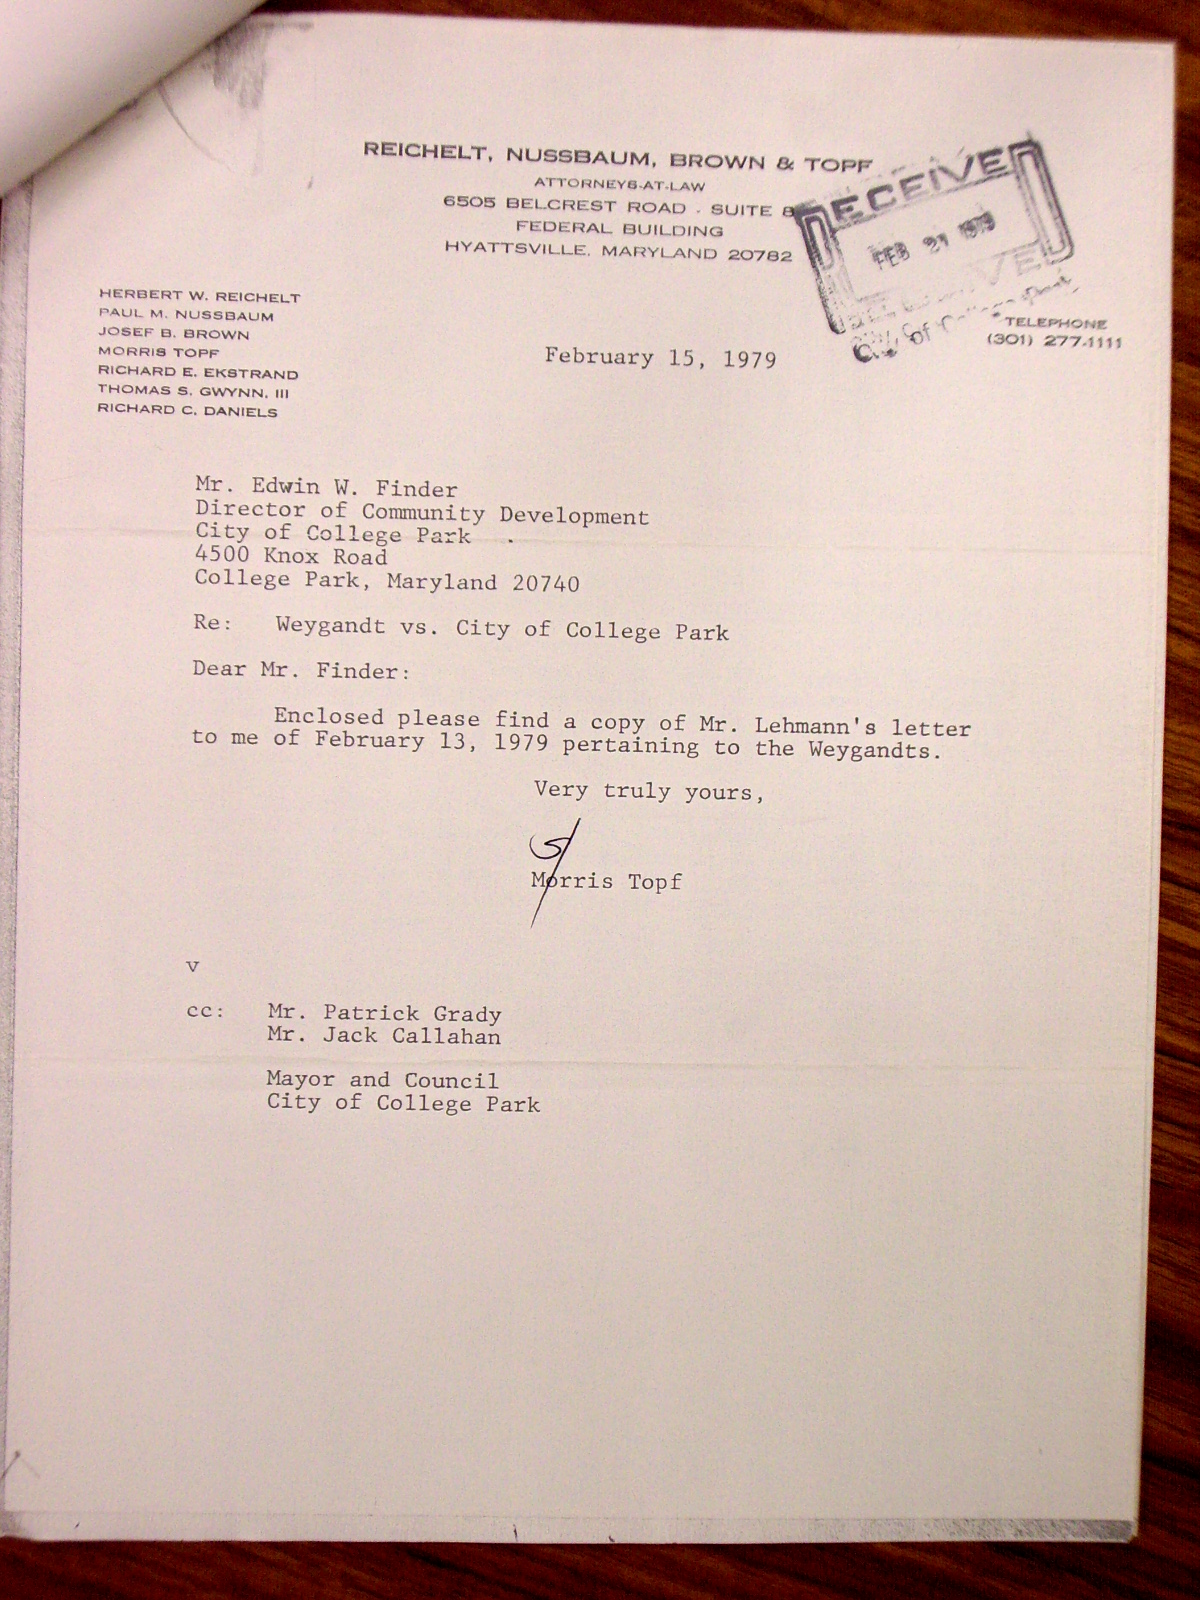 Letter from Morris Topf to Carl Harrison Lehmann, attached to a memo from Topf to Edwin Finder, enclosing an original letter from Lehmann to Topf